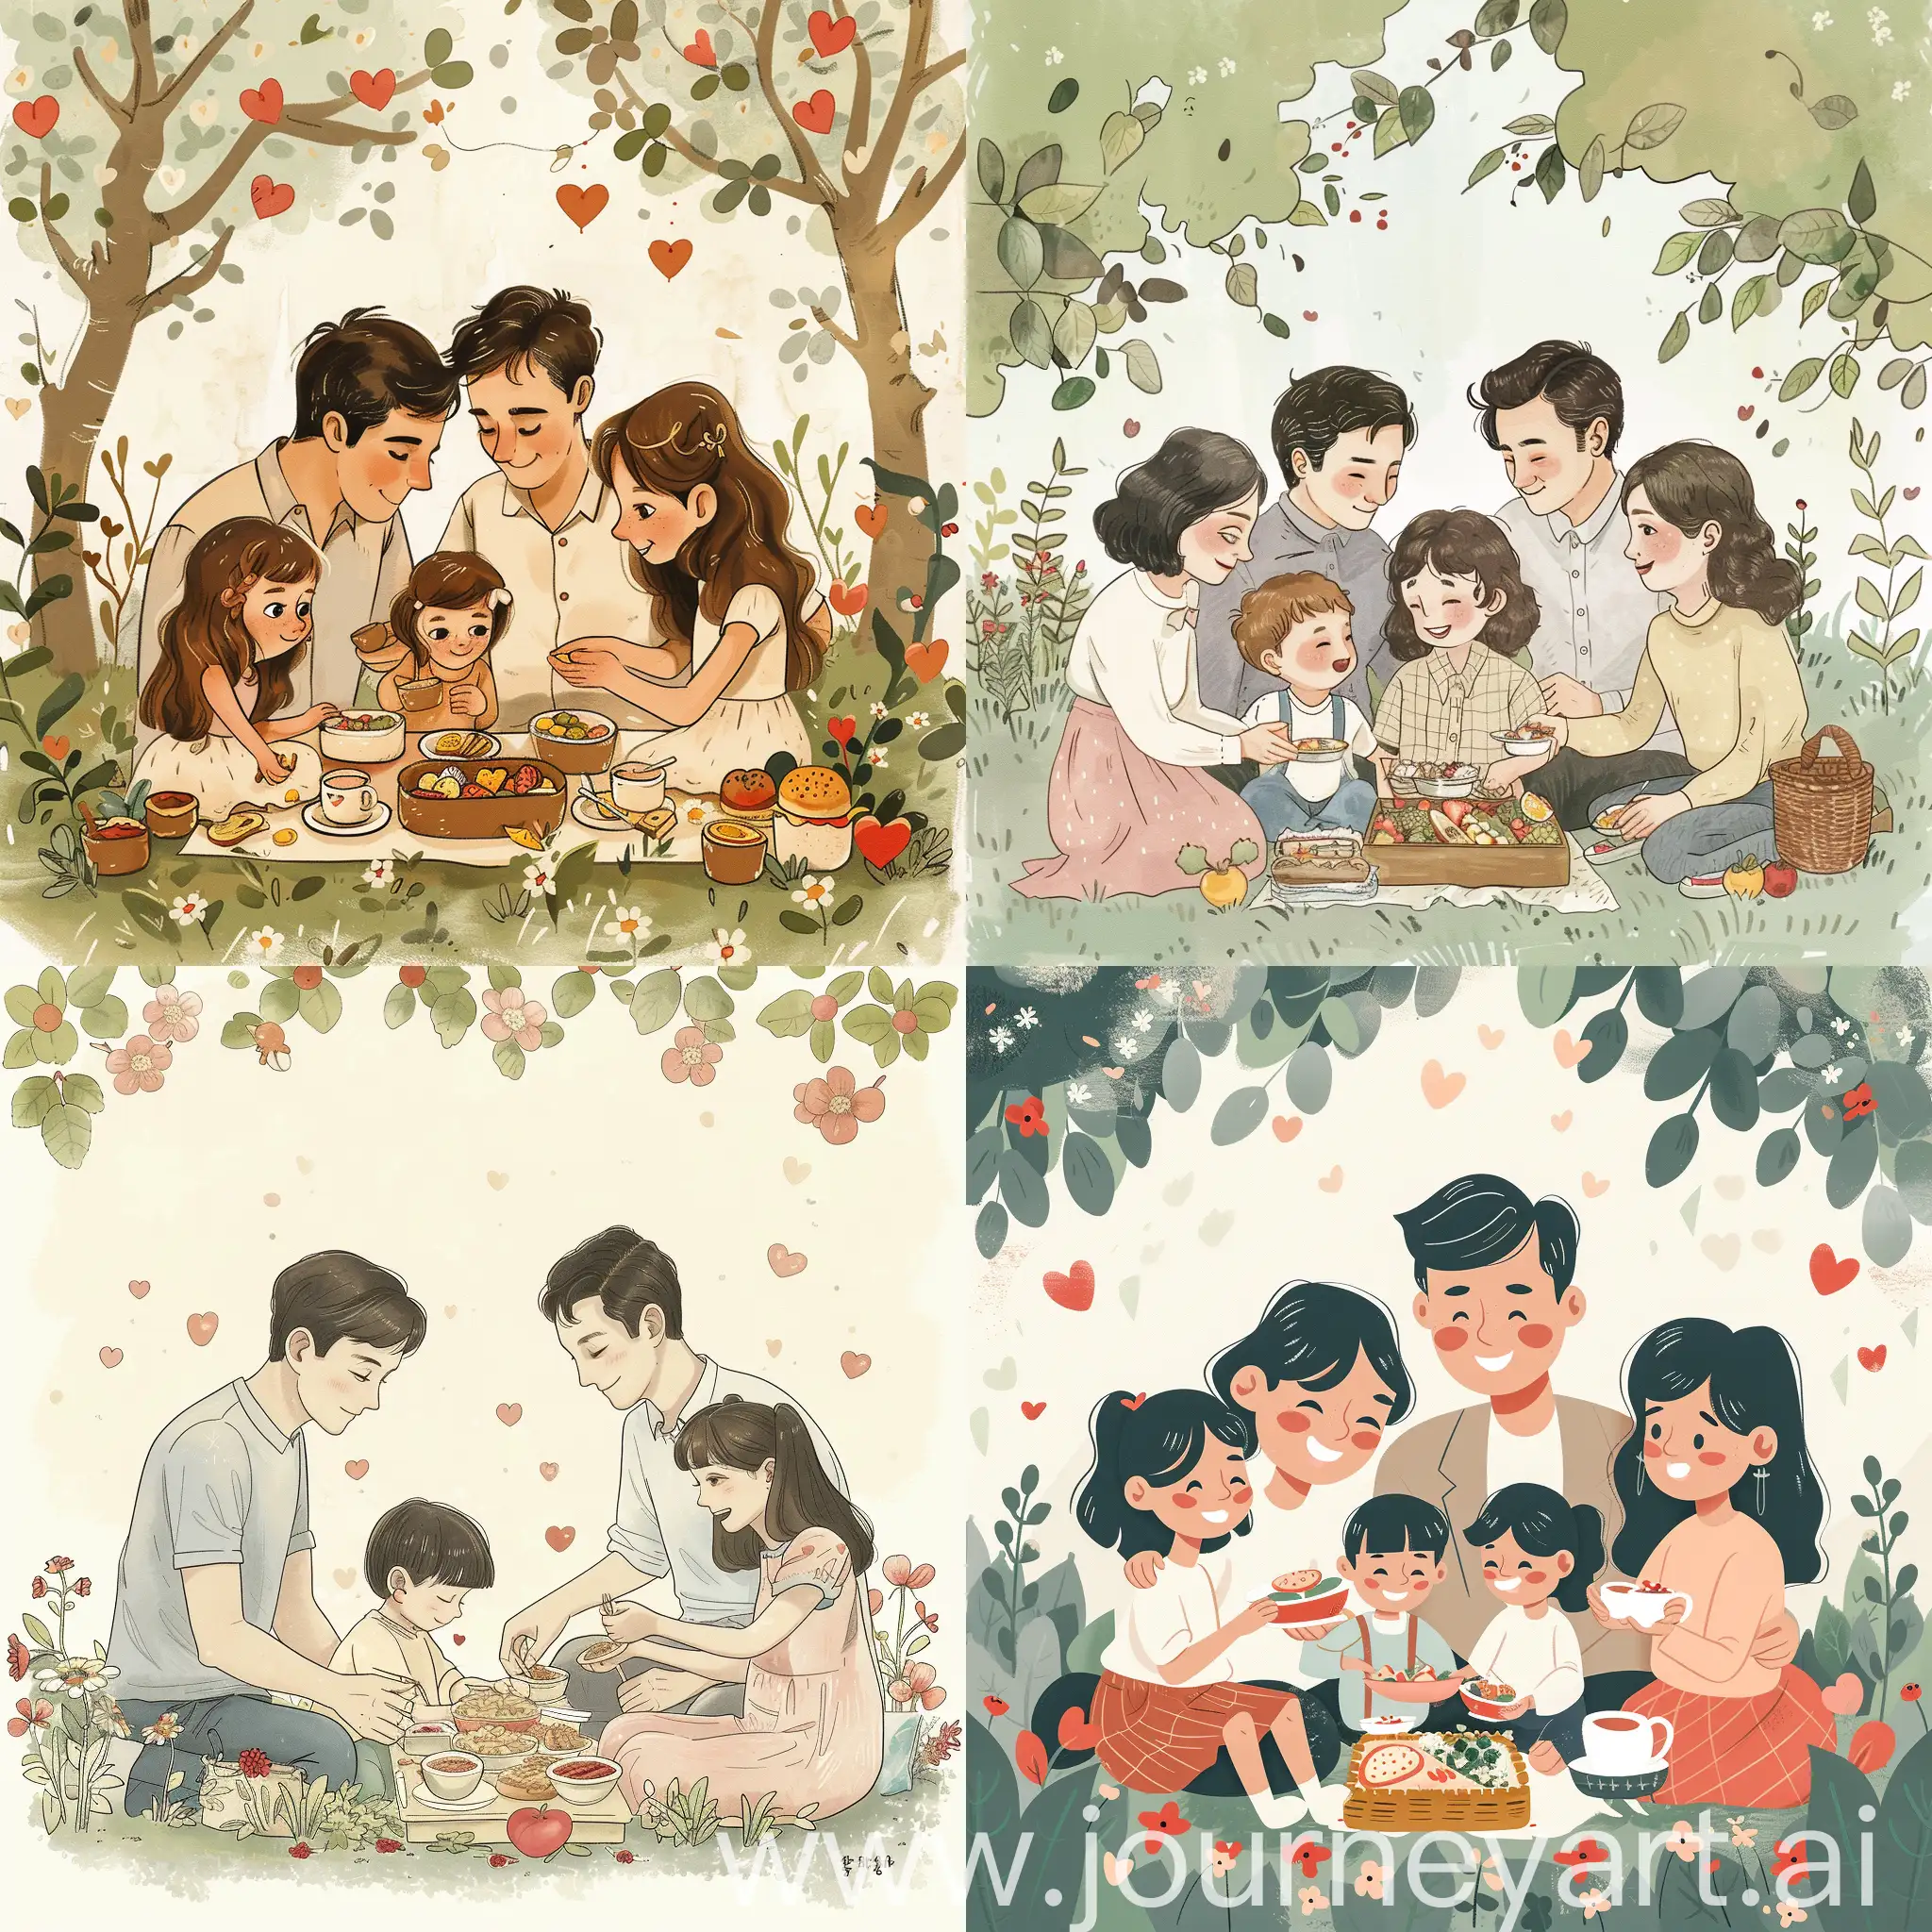 In Valentine's day .The family sat down to eat warmly together. There were father, mother, older sister, younger brother, all having a picnic in the garden.